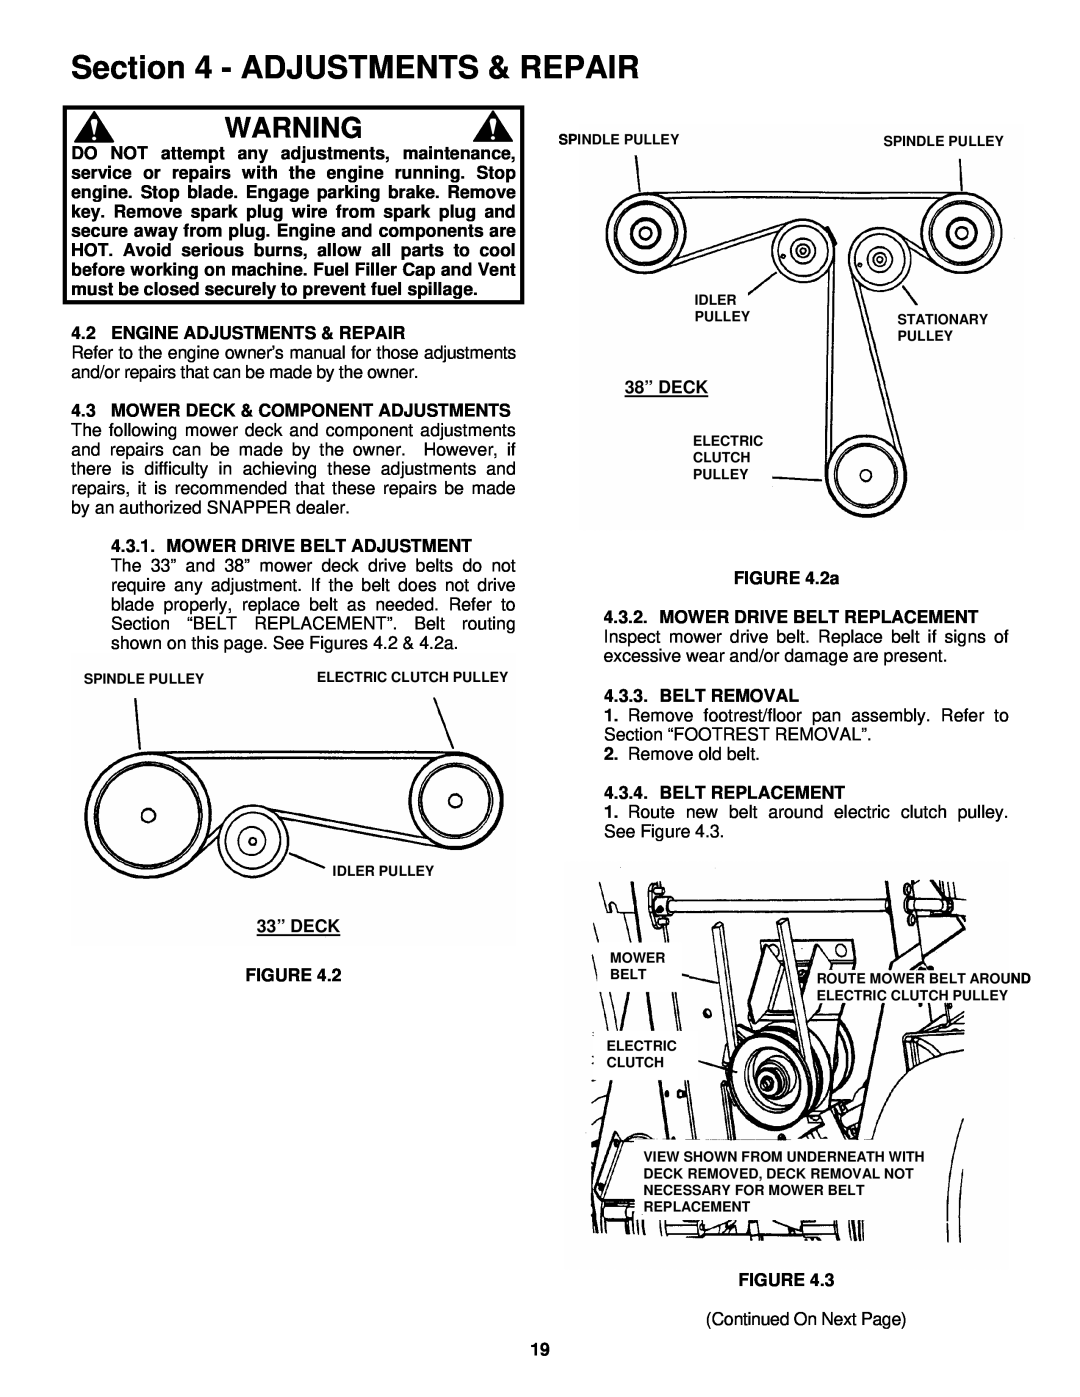 Snapper ESZT18336BVE Adjustments & Repair, Remove old belt, Route new belt around electric clutch pulley. See Figure 